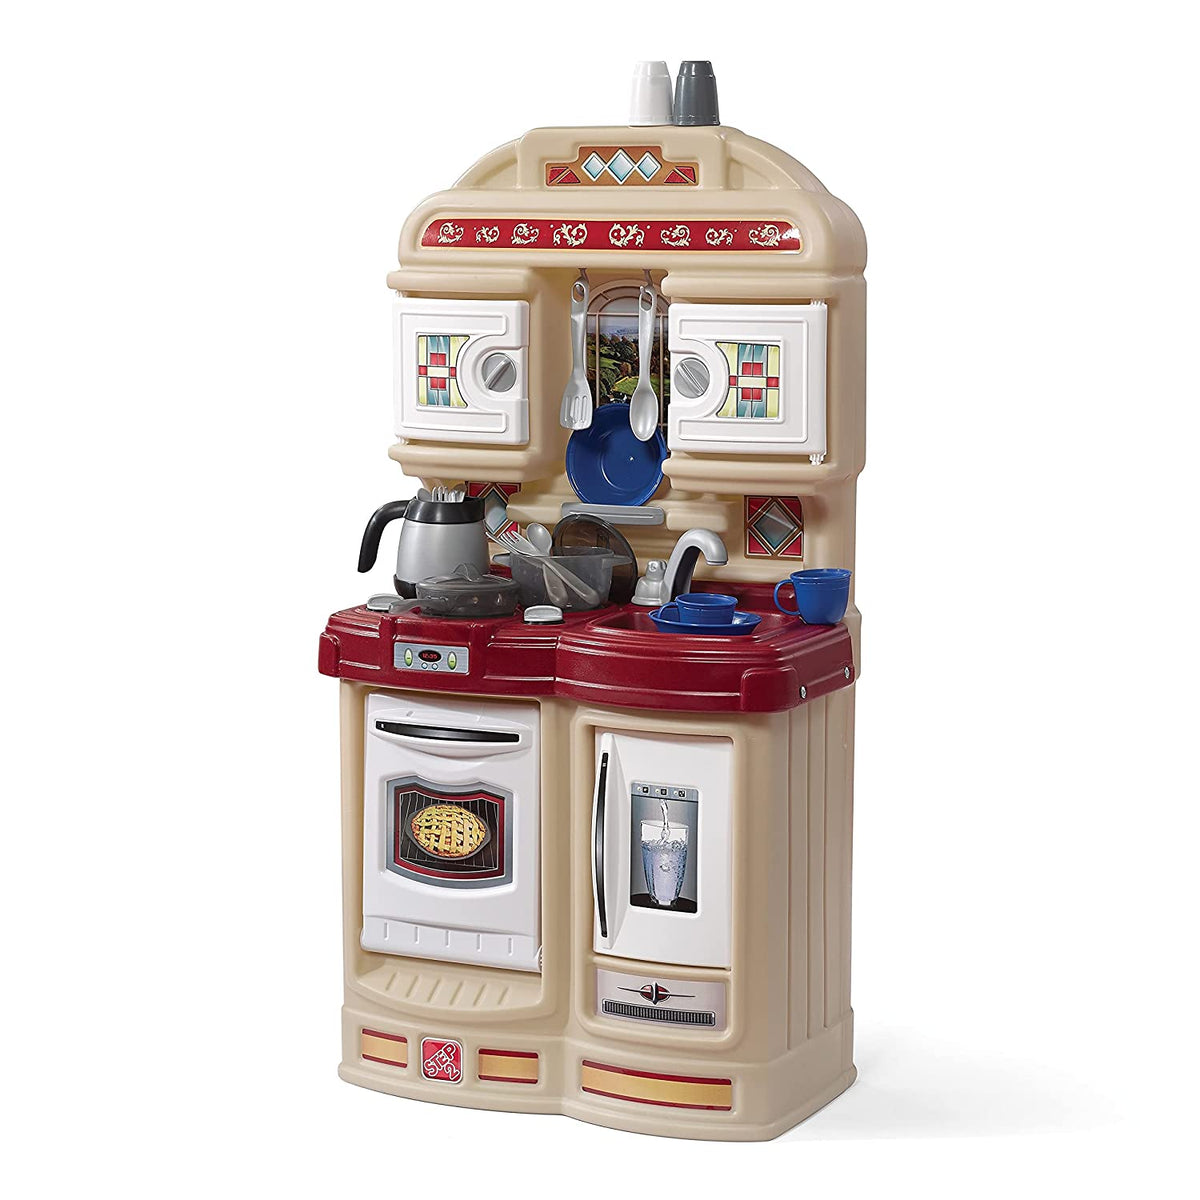 Step2 Cozy Kitchen - Small Play Kitchen Set For Toddlers